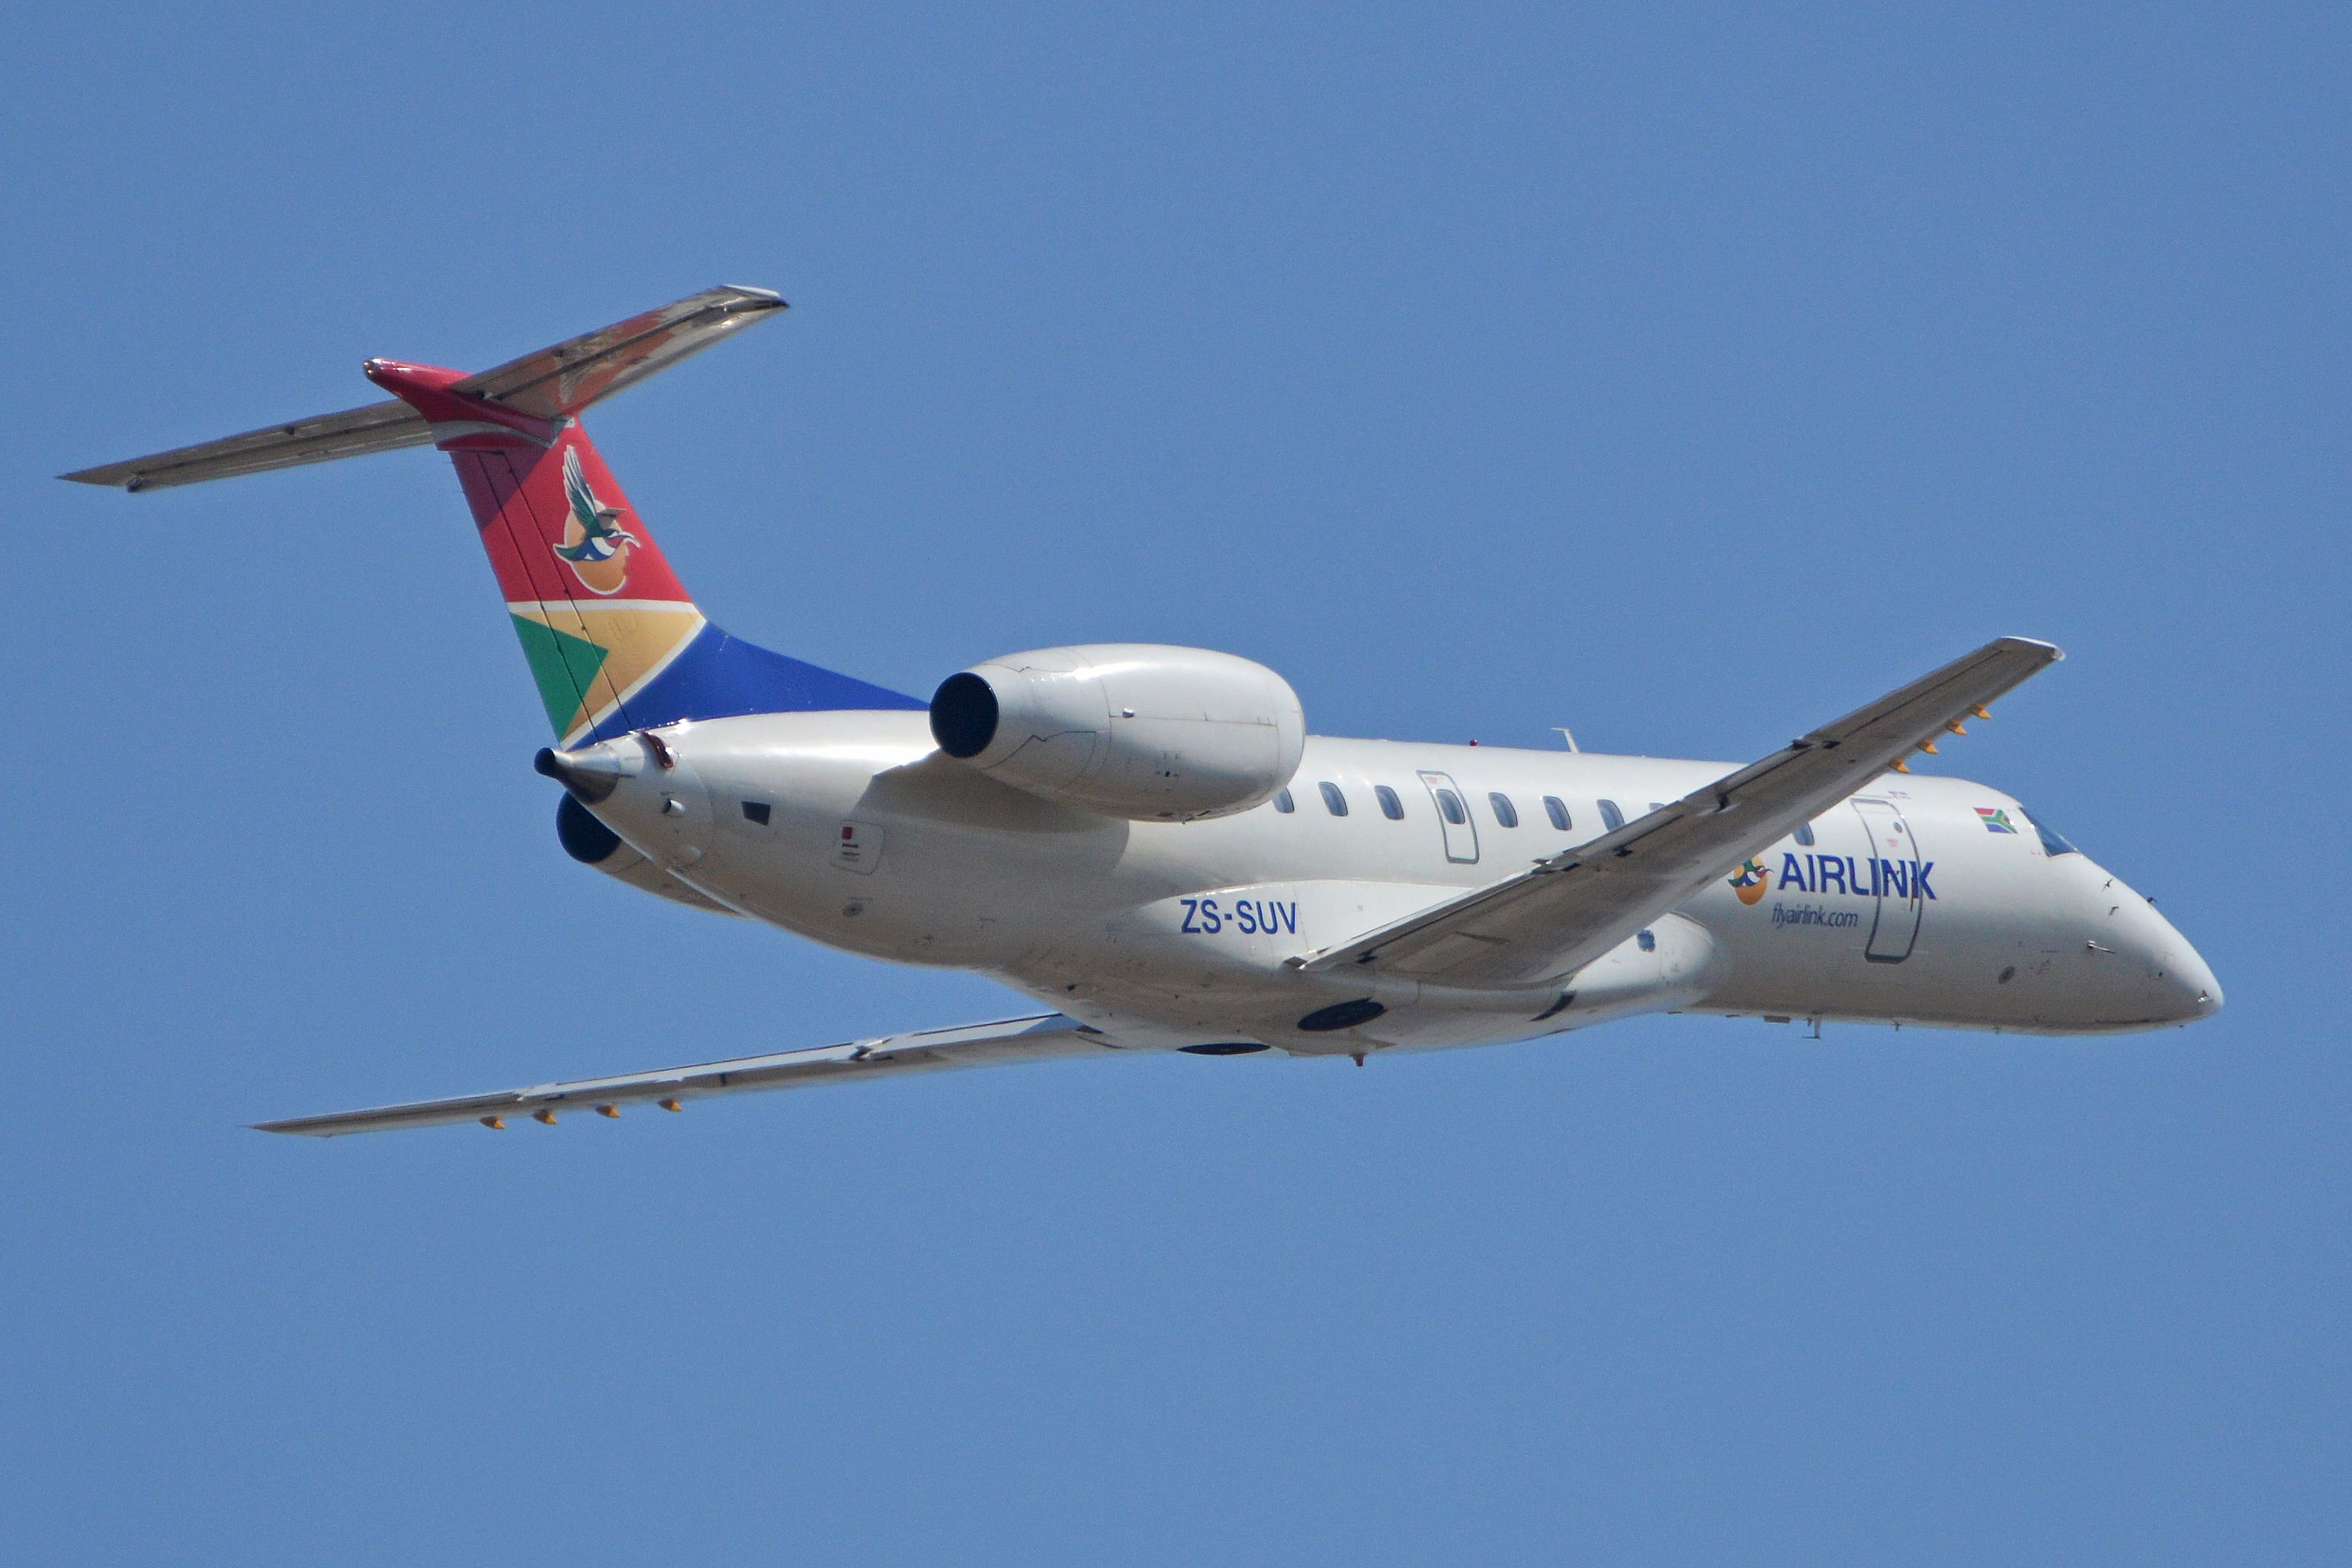 An Airlink Embraer ERJ-135 flying in the sky. 